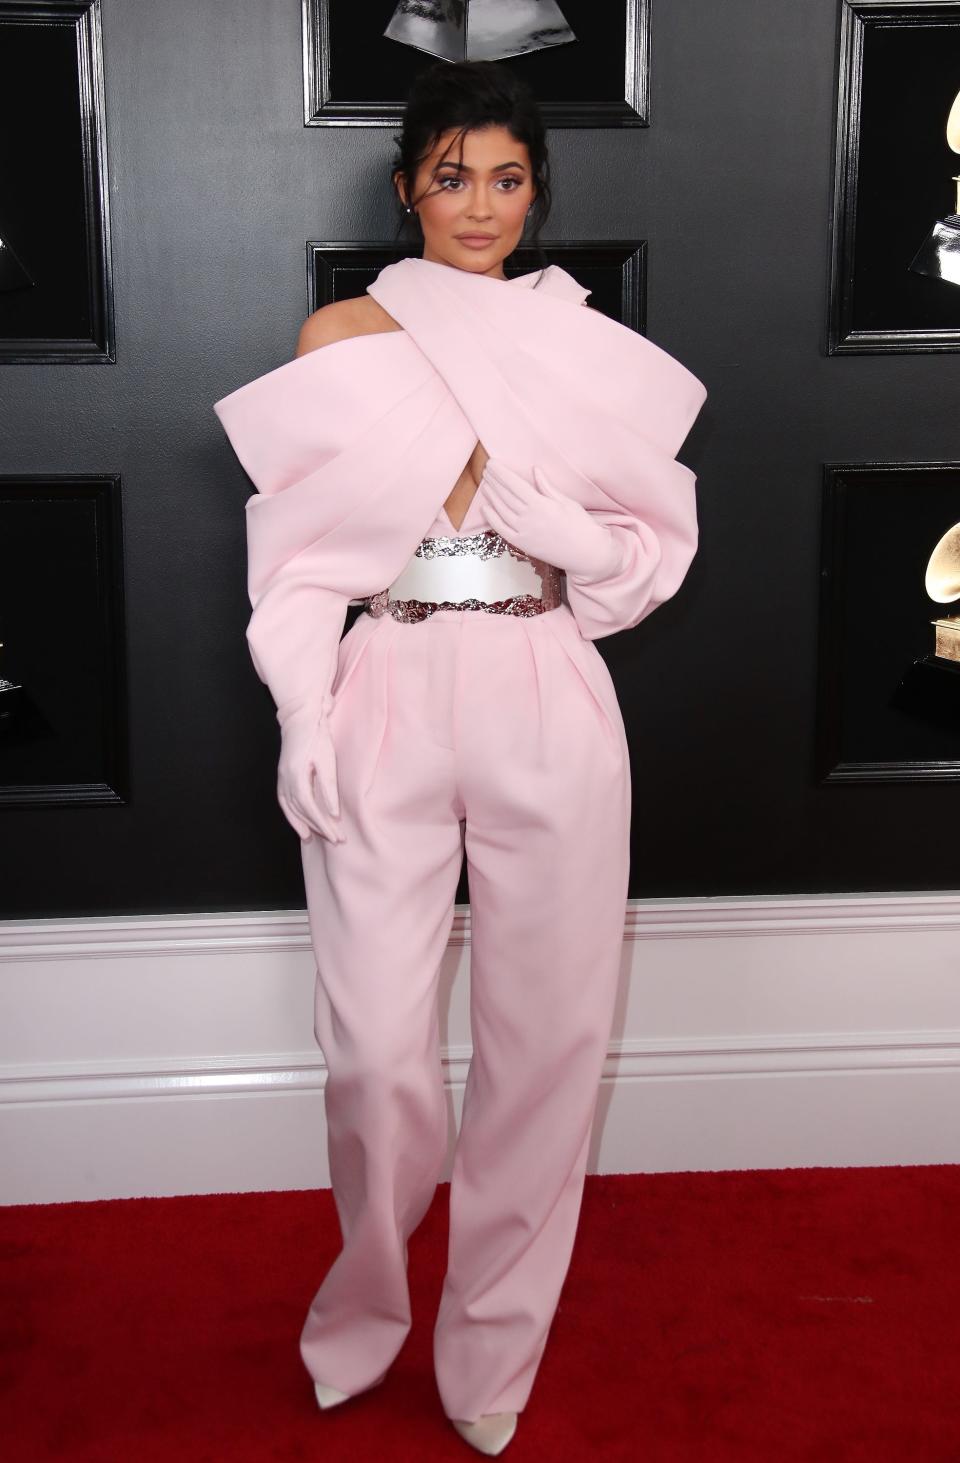 Kylie Jenner attends the 61st Annual GRAMMY Awards in 2019.